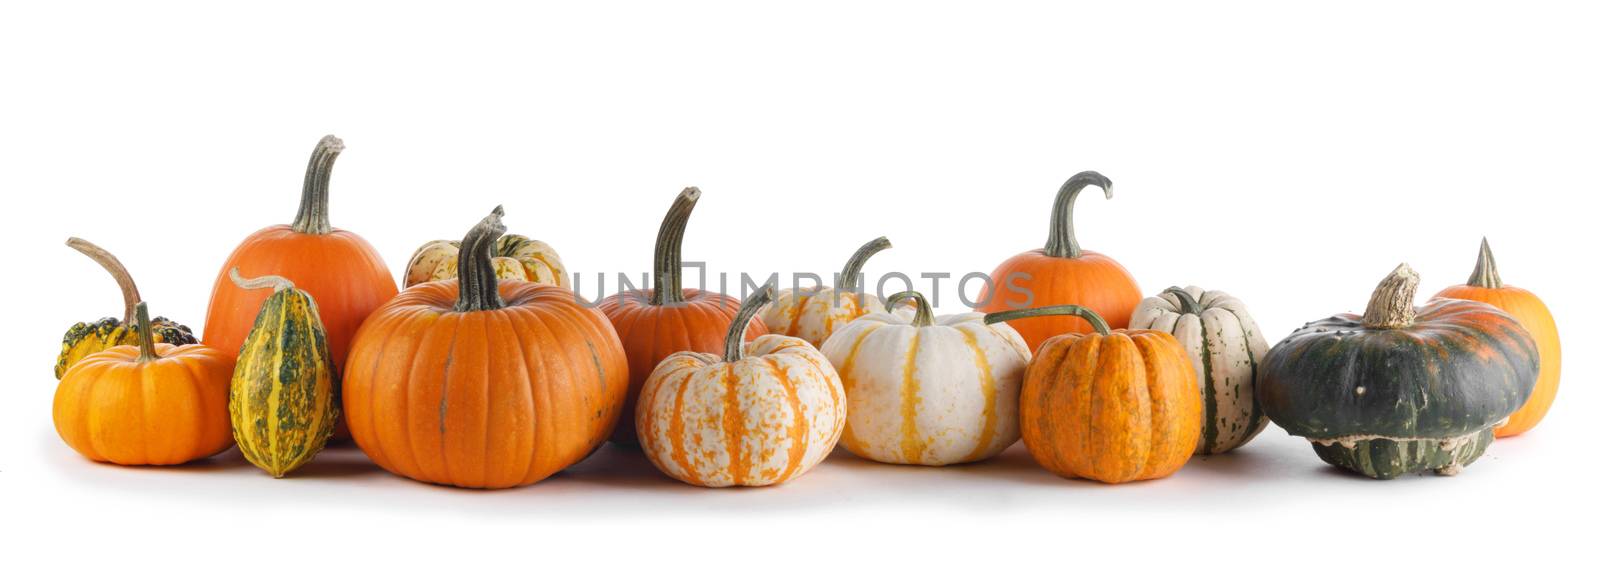 Many various pumpkins isolated on white background, Halloween or Thanksgiving day concept